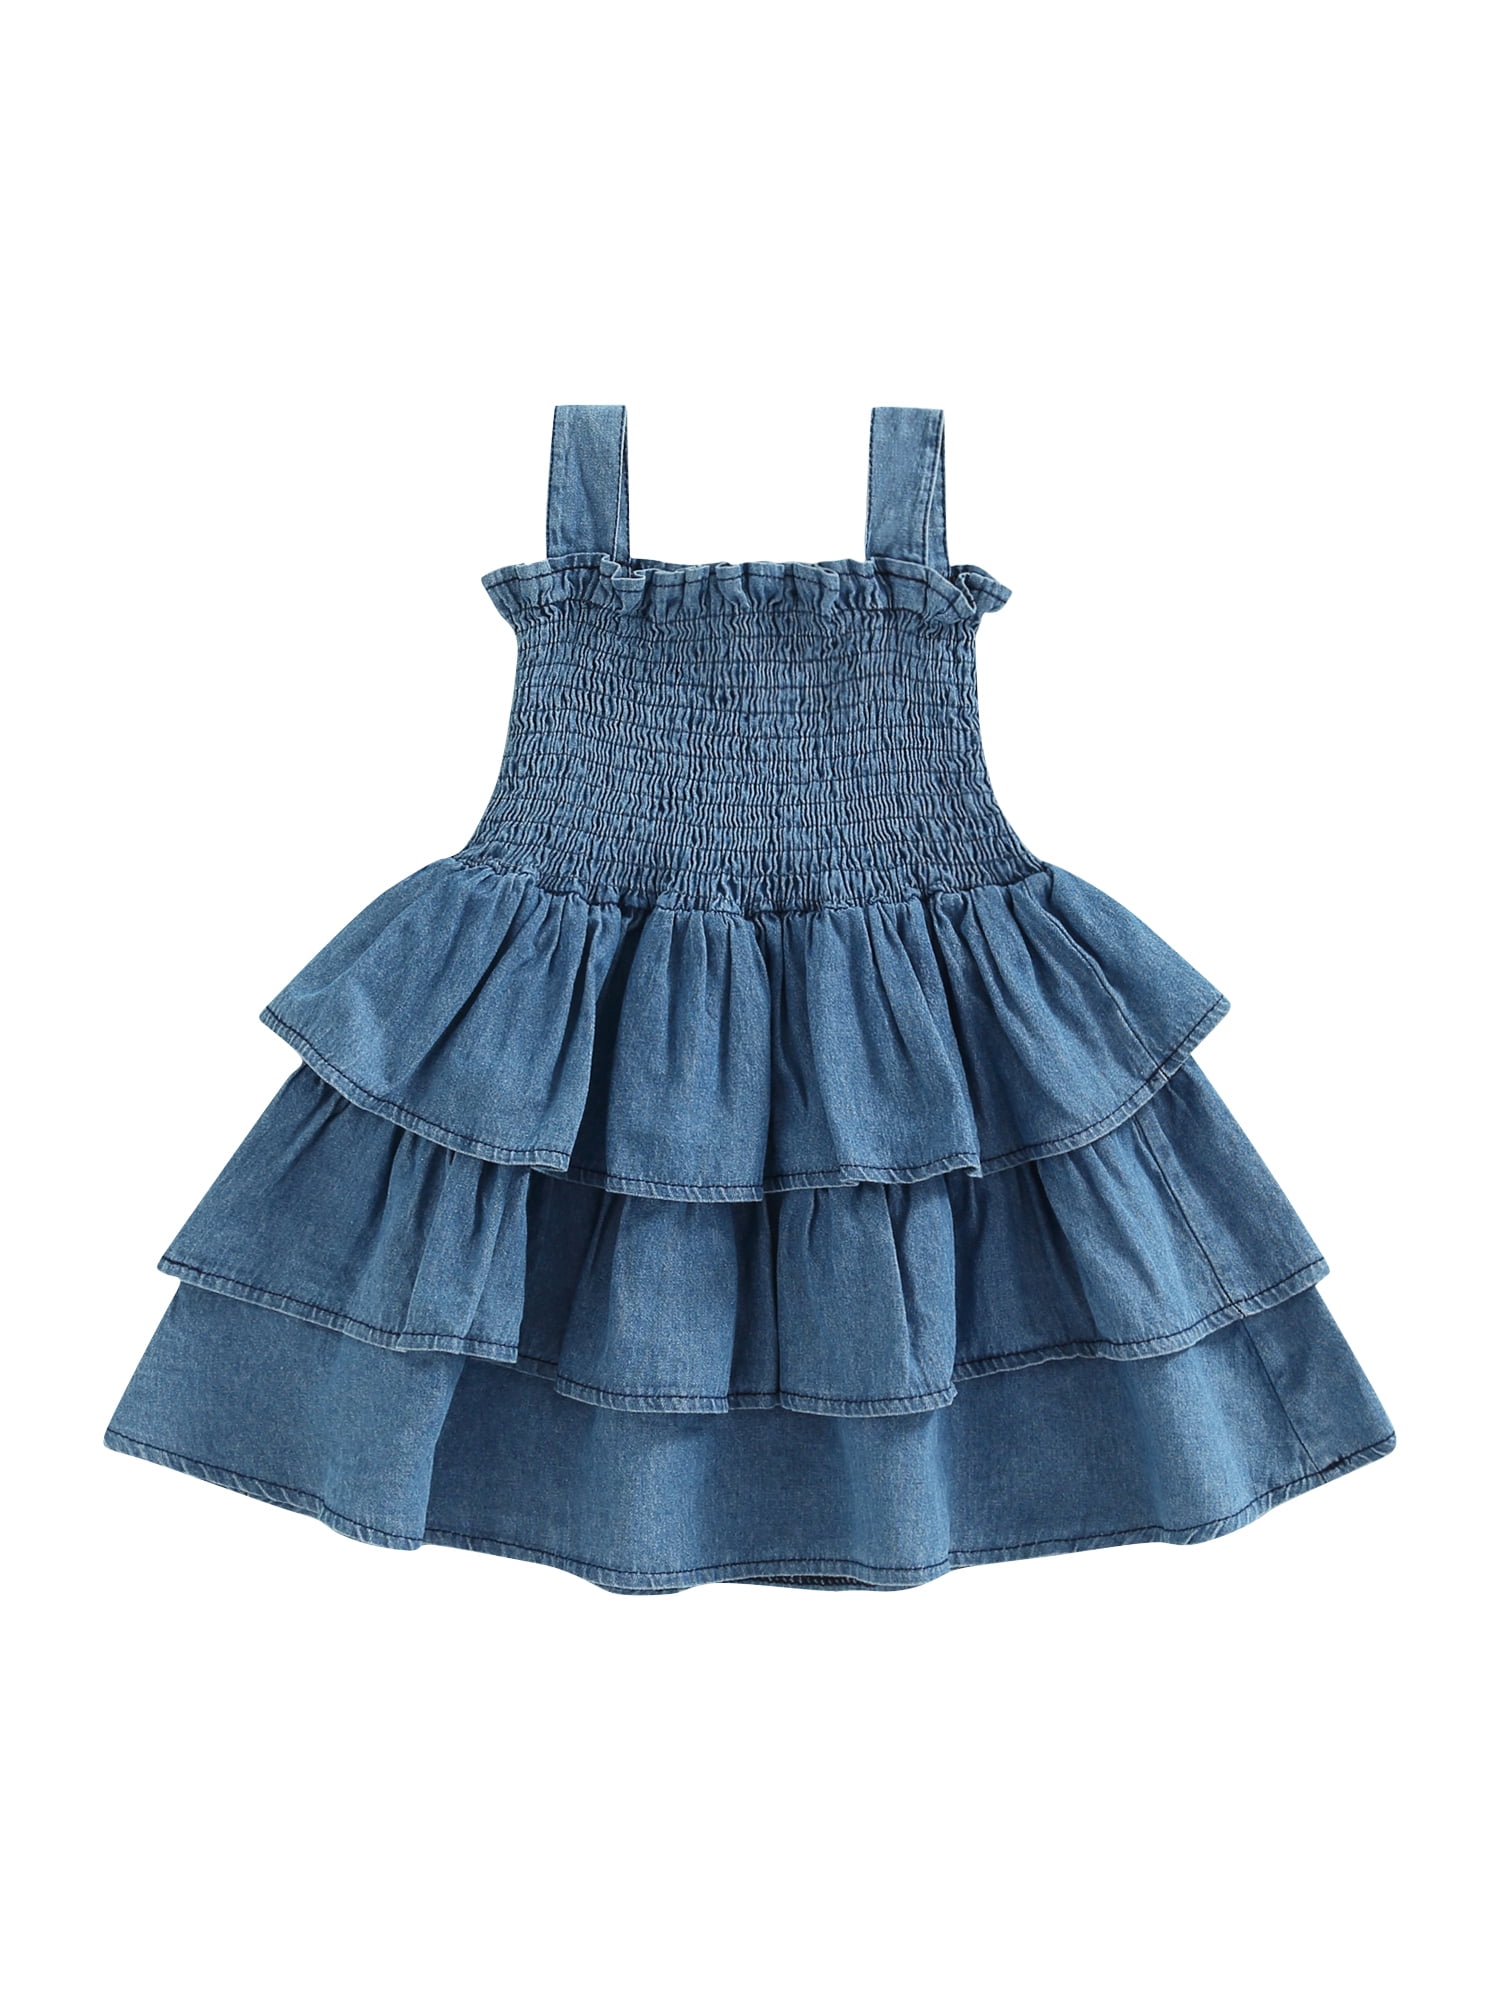 Kids Baby Girls Clothes Denim Tulle Dress / Overalls Age 6M-4Y Outfits -  Walmart.com